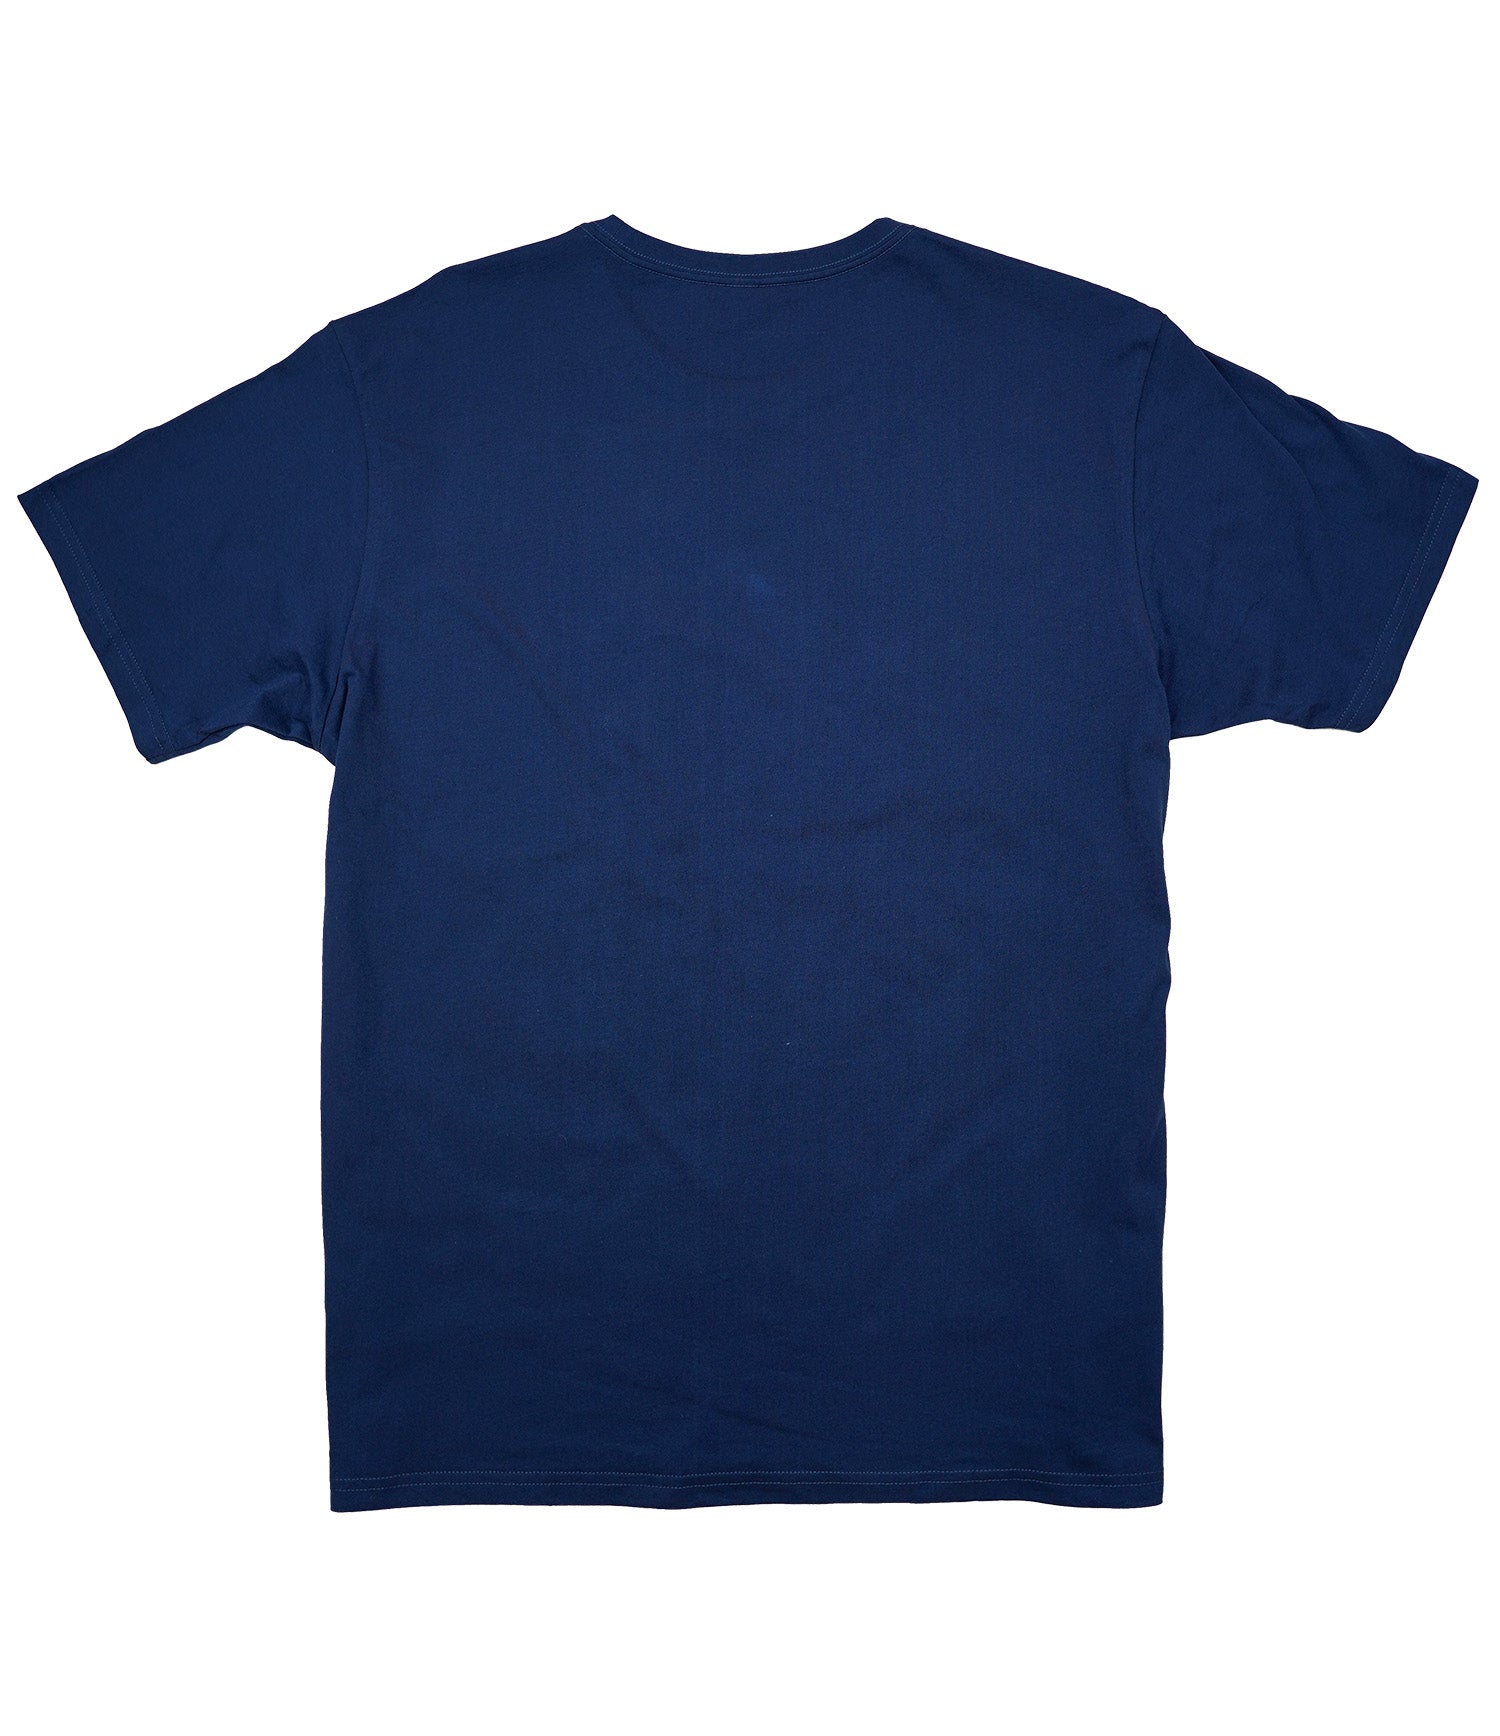 Vintage Graphic Tee - Navy - Back